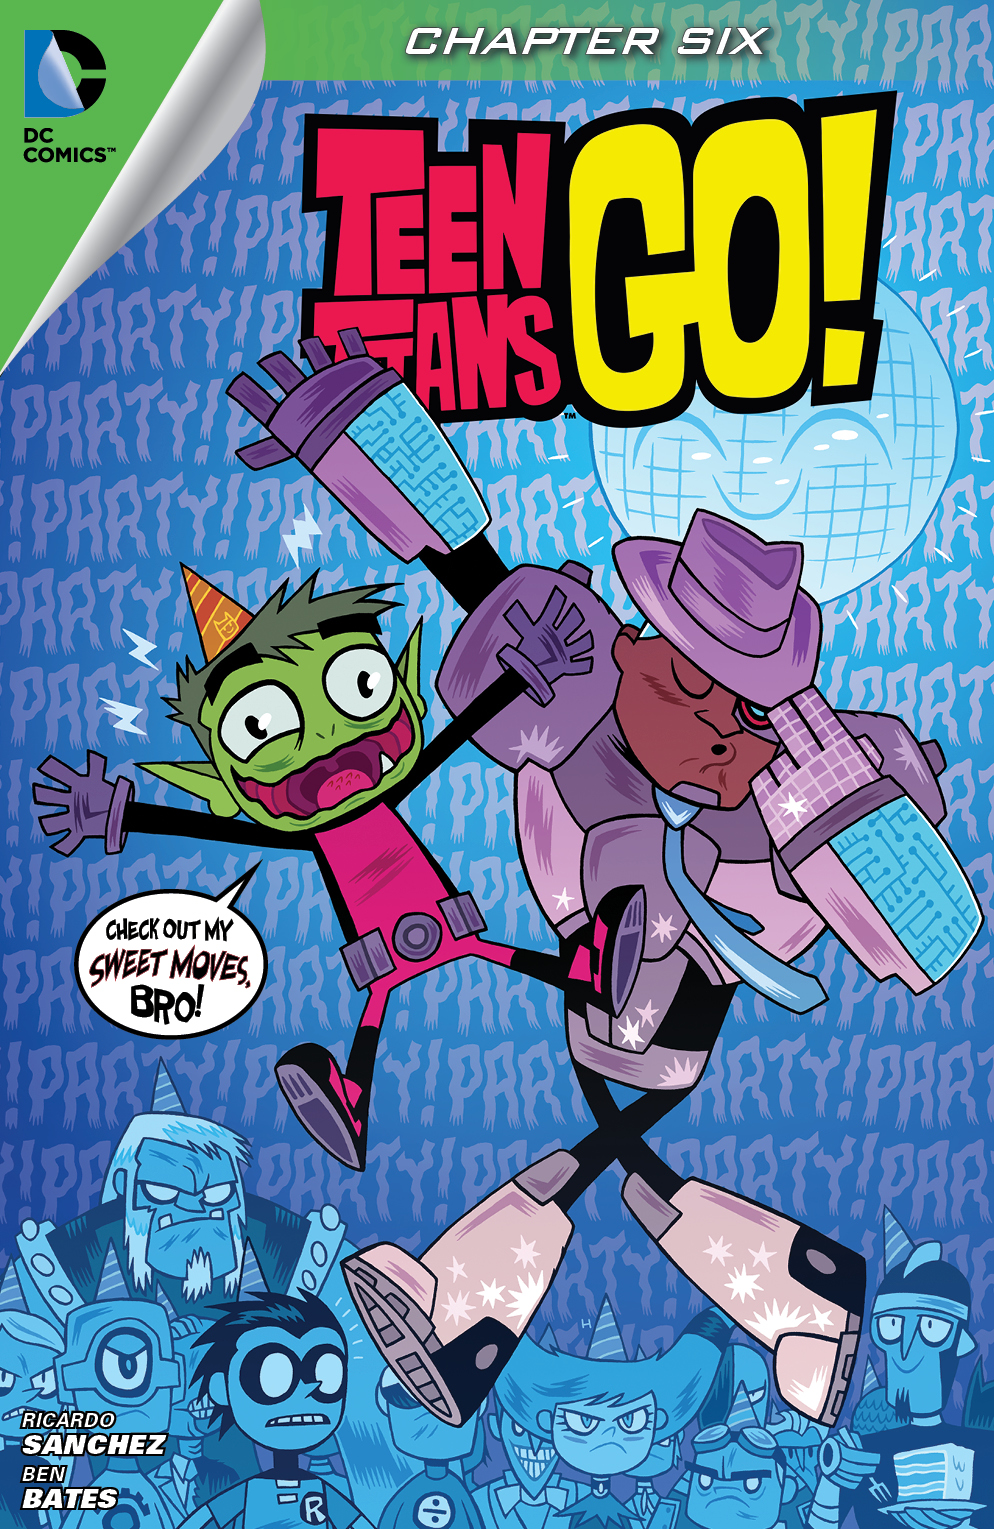 Teen Titans Go! (2013-) #6 preview images